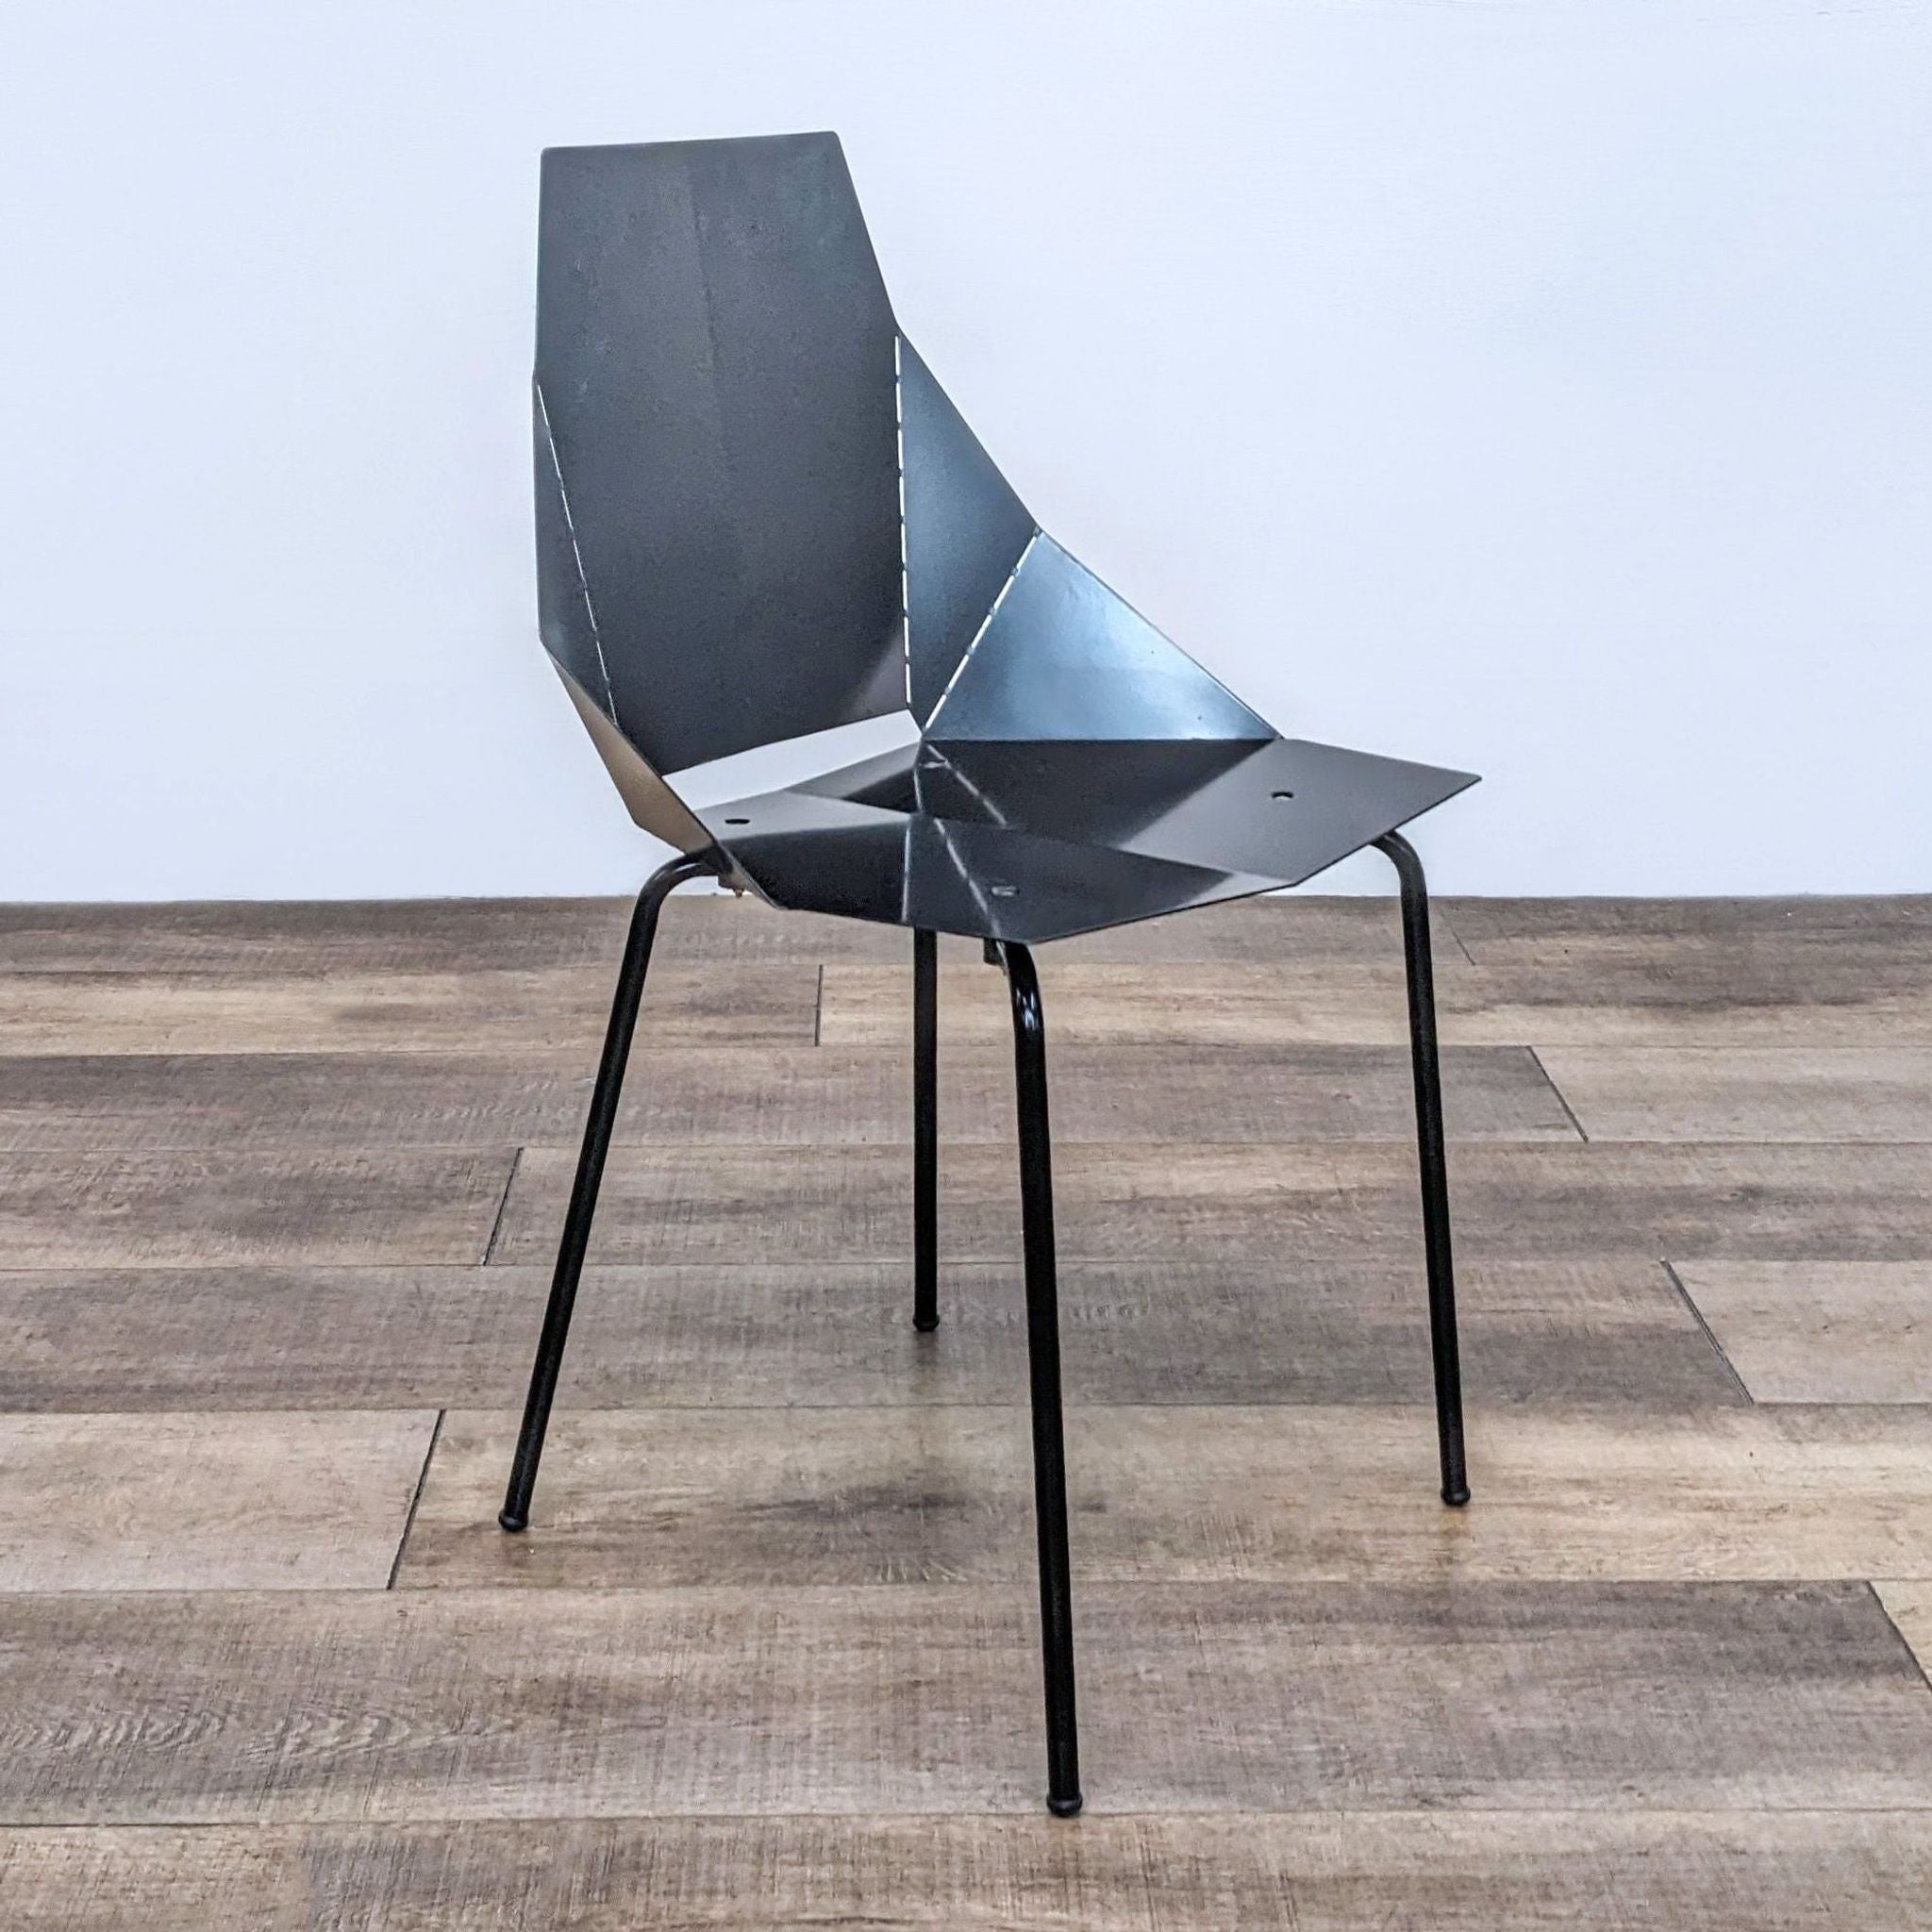 Blu Dot Real Good Chair in black powder coated steel with a geometric, industrial design, on a wooden floor.